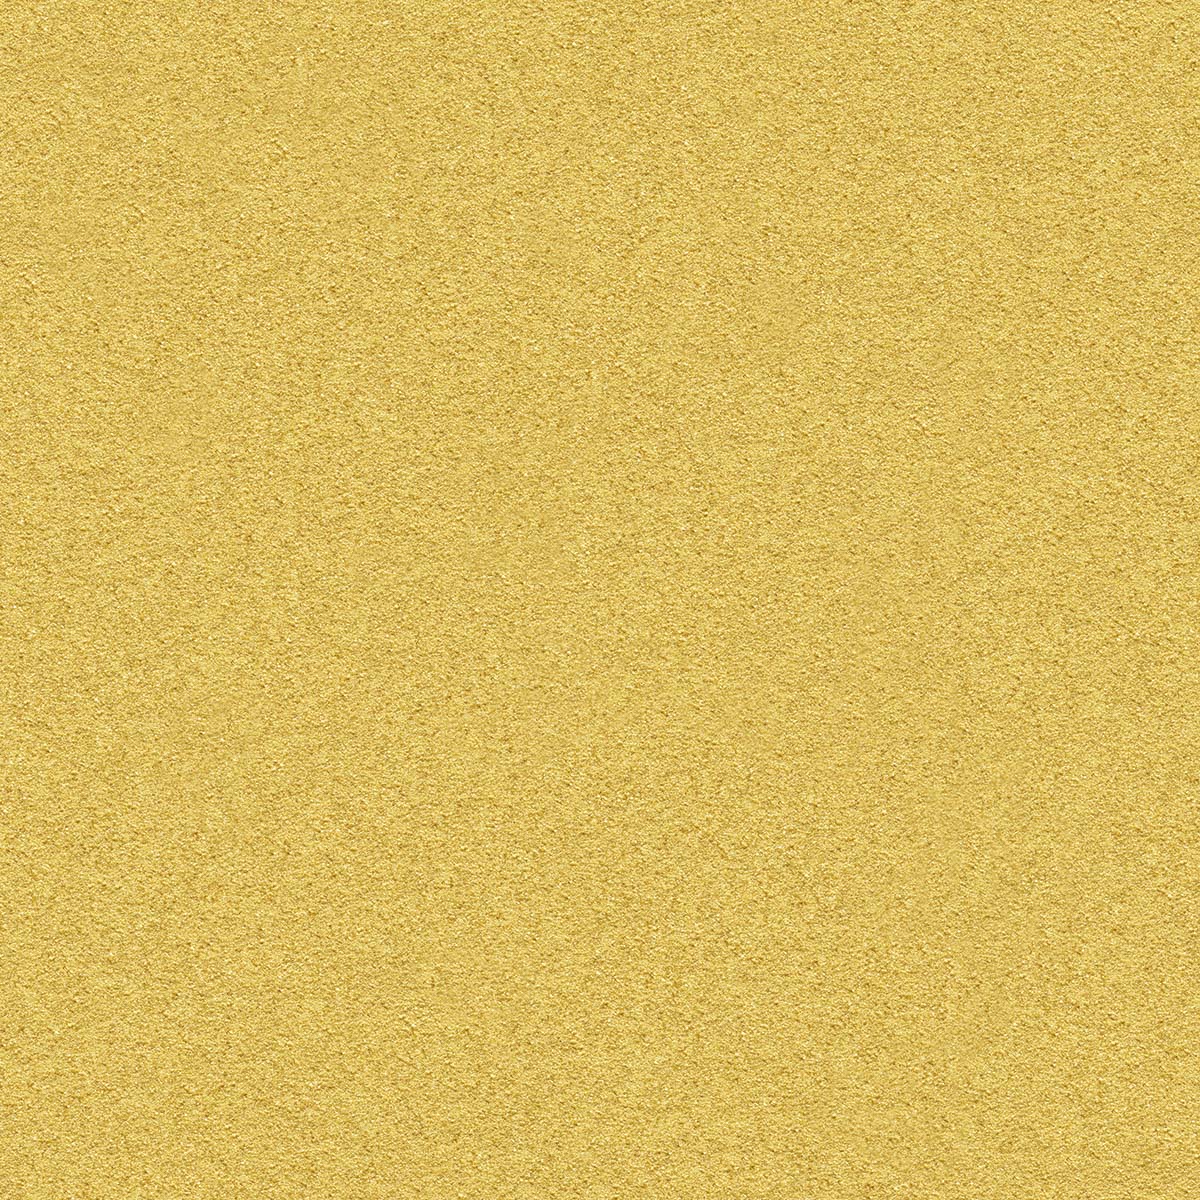 A yellow speckled surface